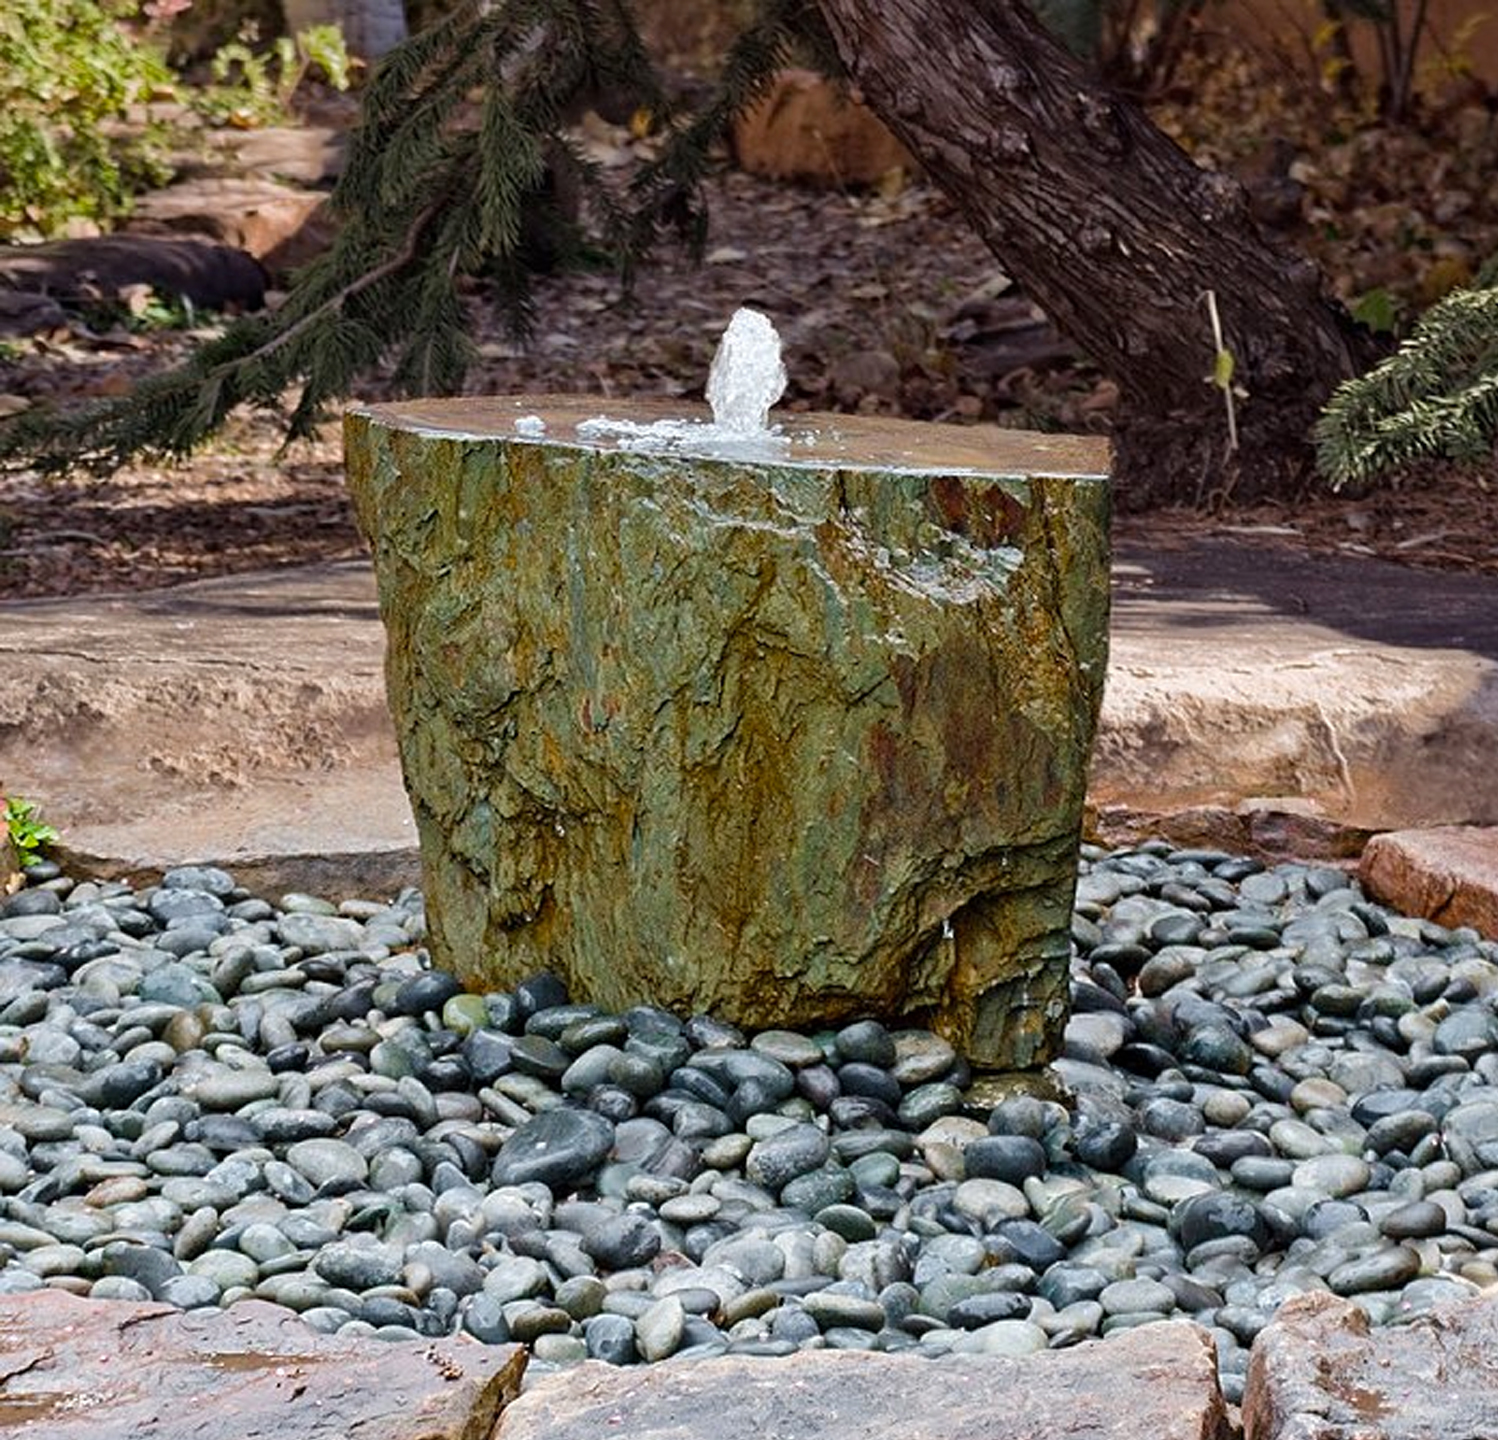 True to its name the French slate fountain is carved from large pieces of fine-grained metamorphic rock imported from Mal-